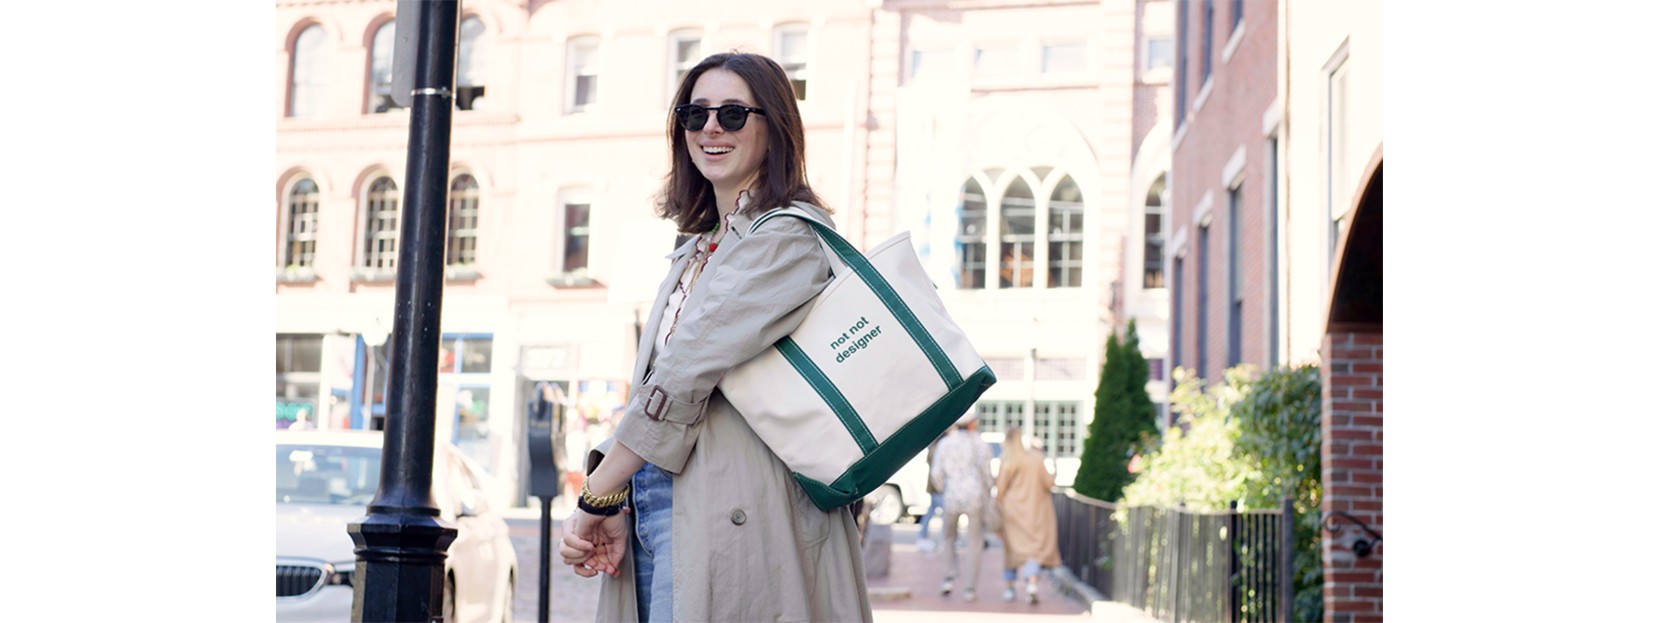 How L.L. Bean's Boat and Tote Bag Has Become the Latest Shopping Trend